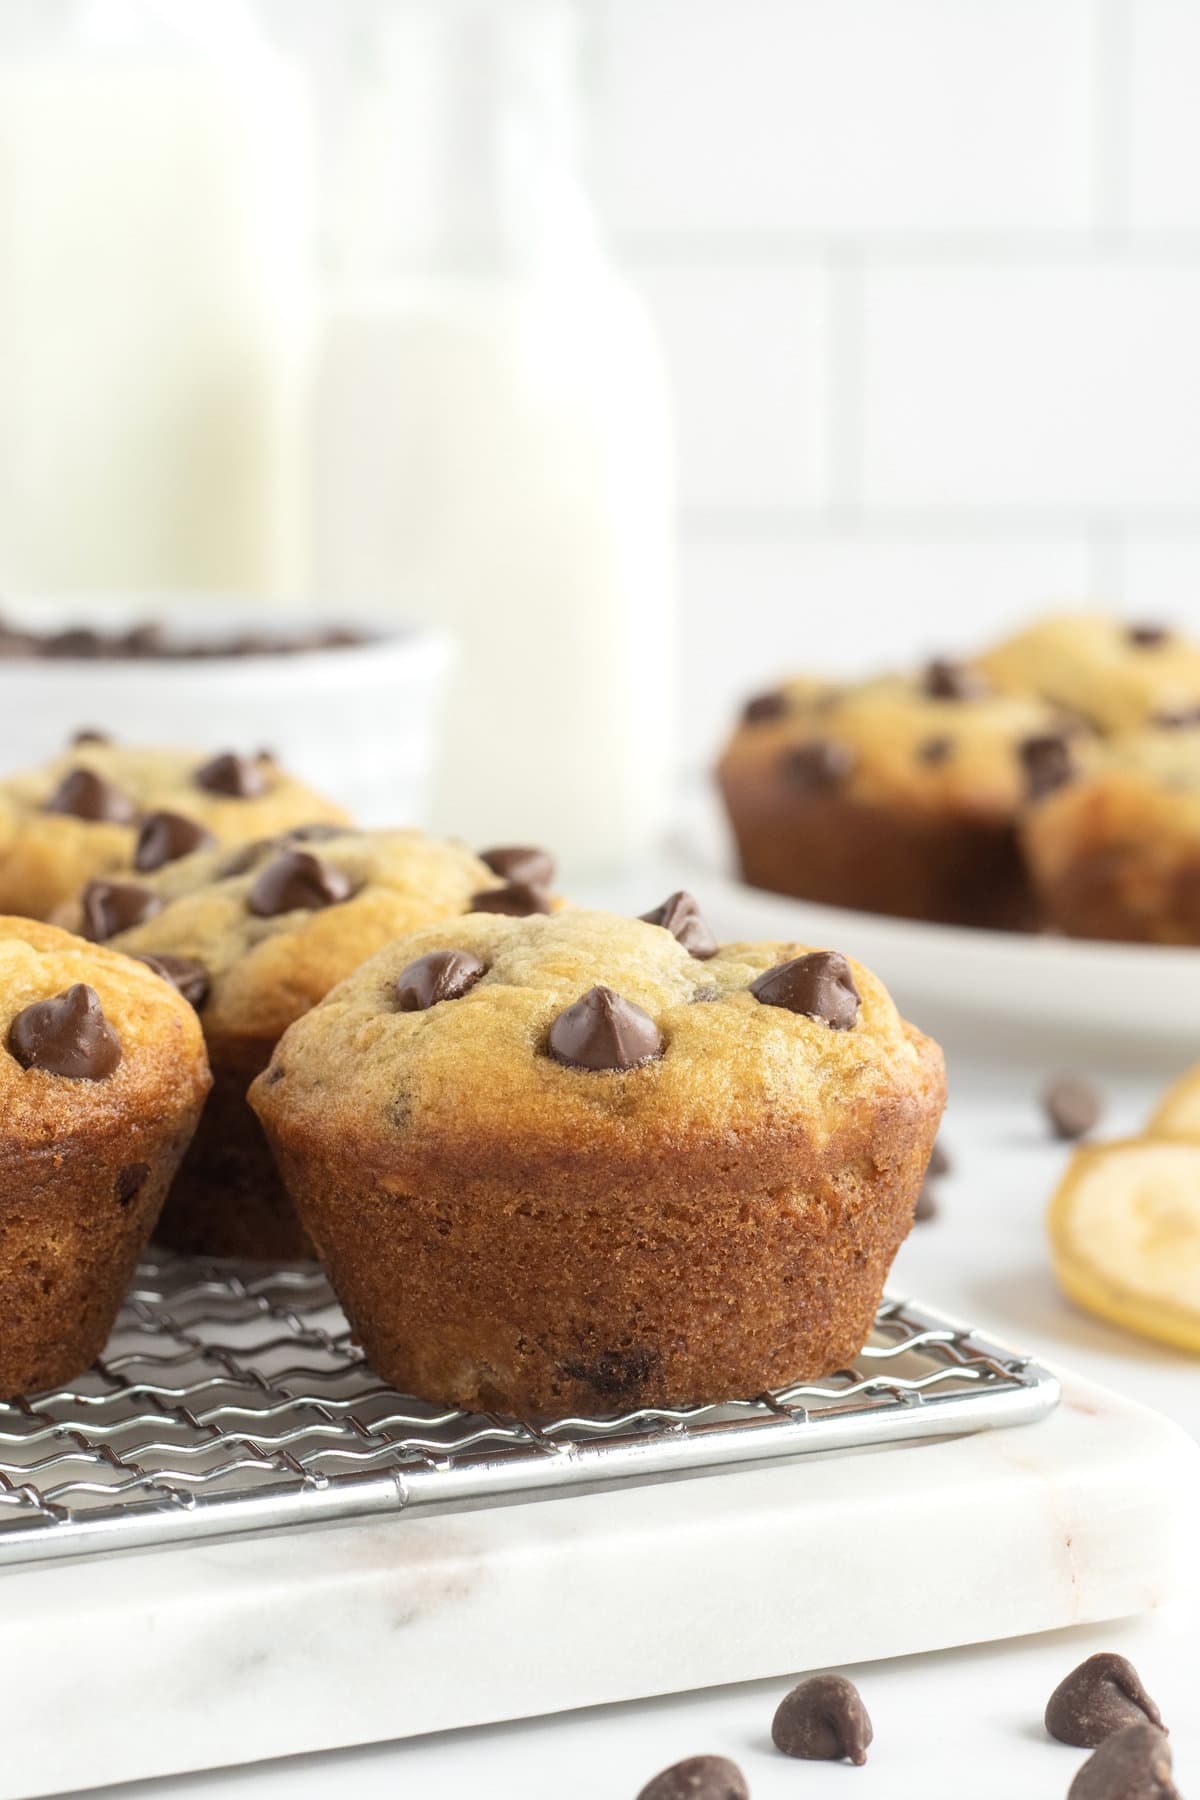 Six banana chocolate chip muffins on a wire rack.